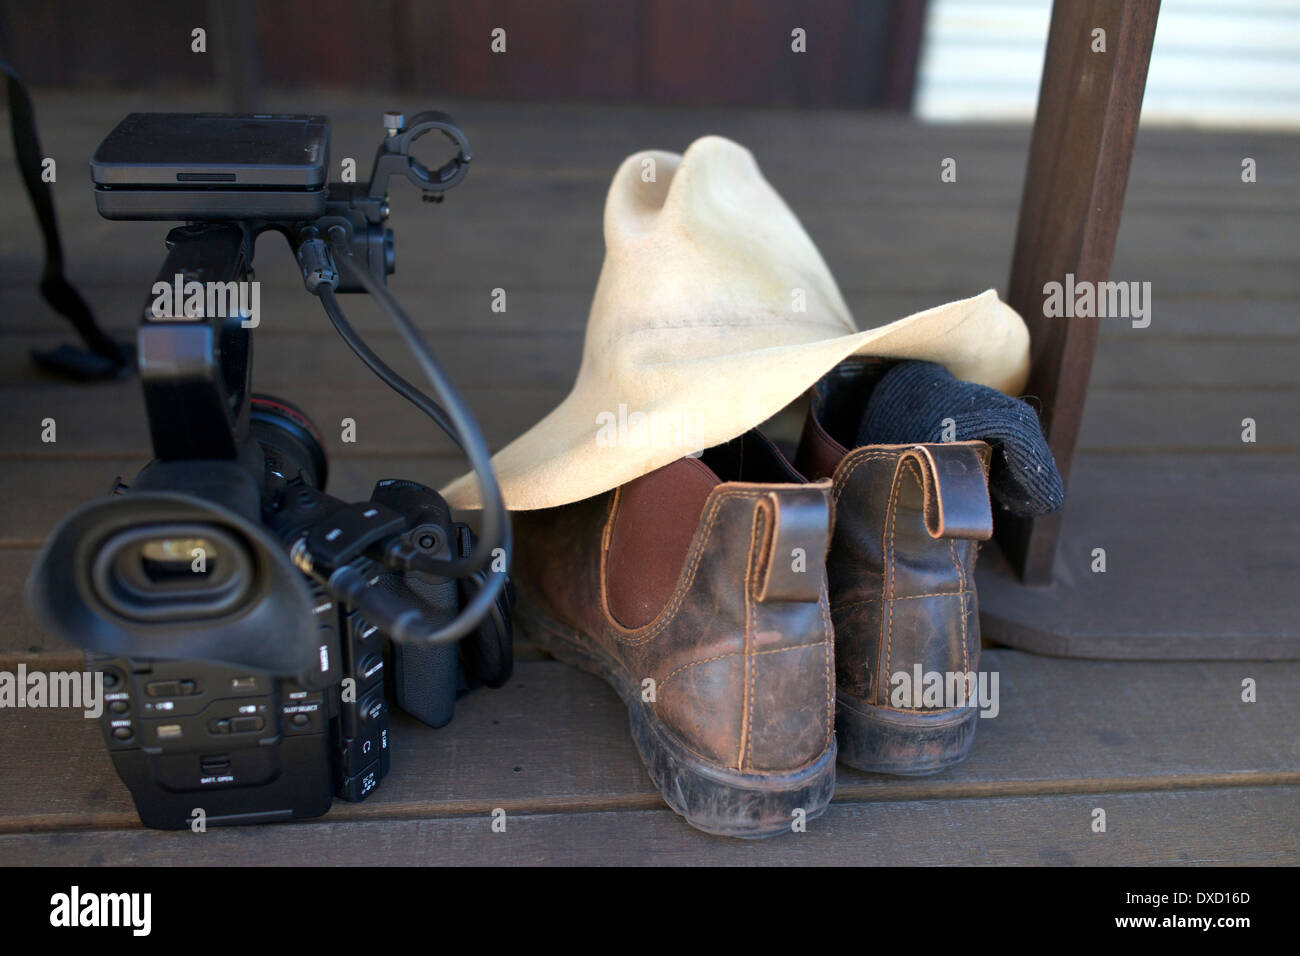 Filmgear and a Cowboy hat Stock Photo